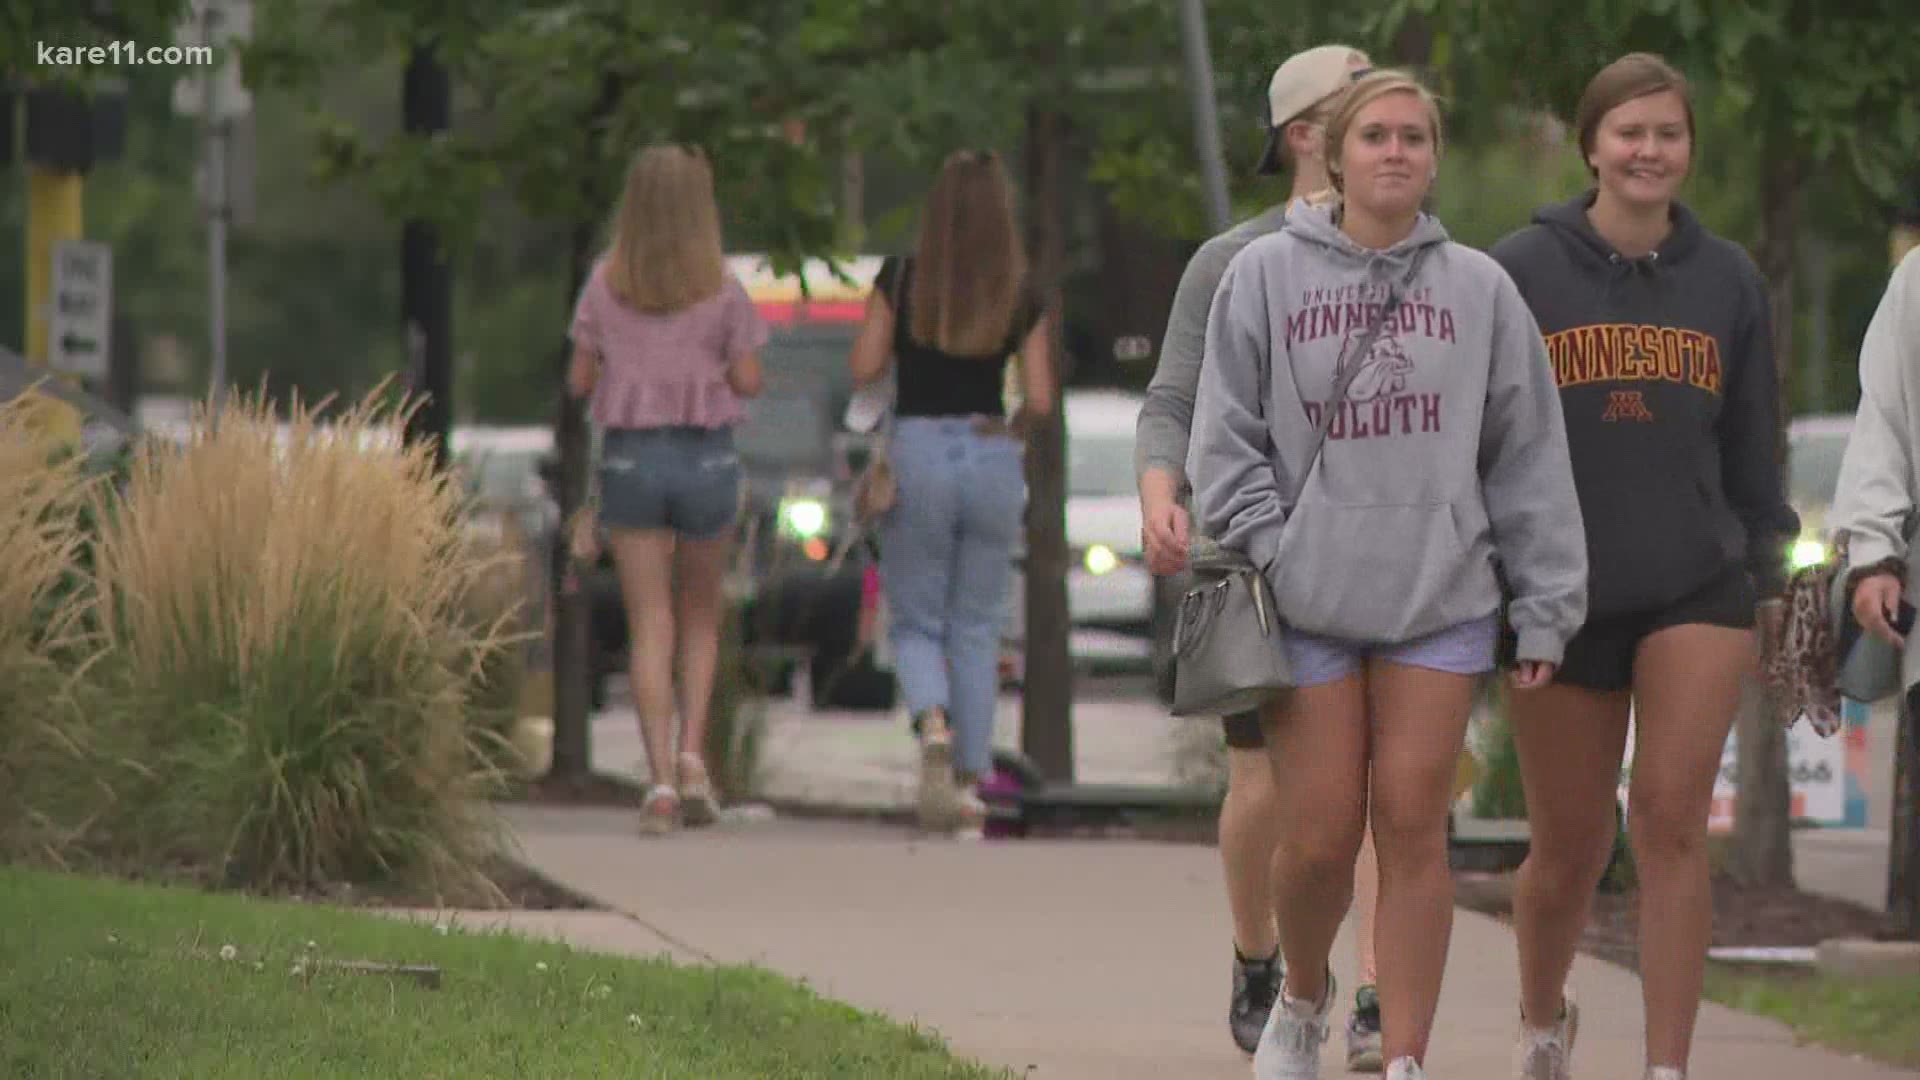 The University of Minnesota's new move-in plan for student's involves a quarantine and a curfew.